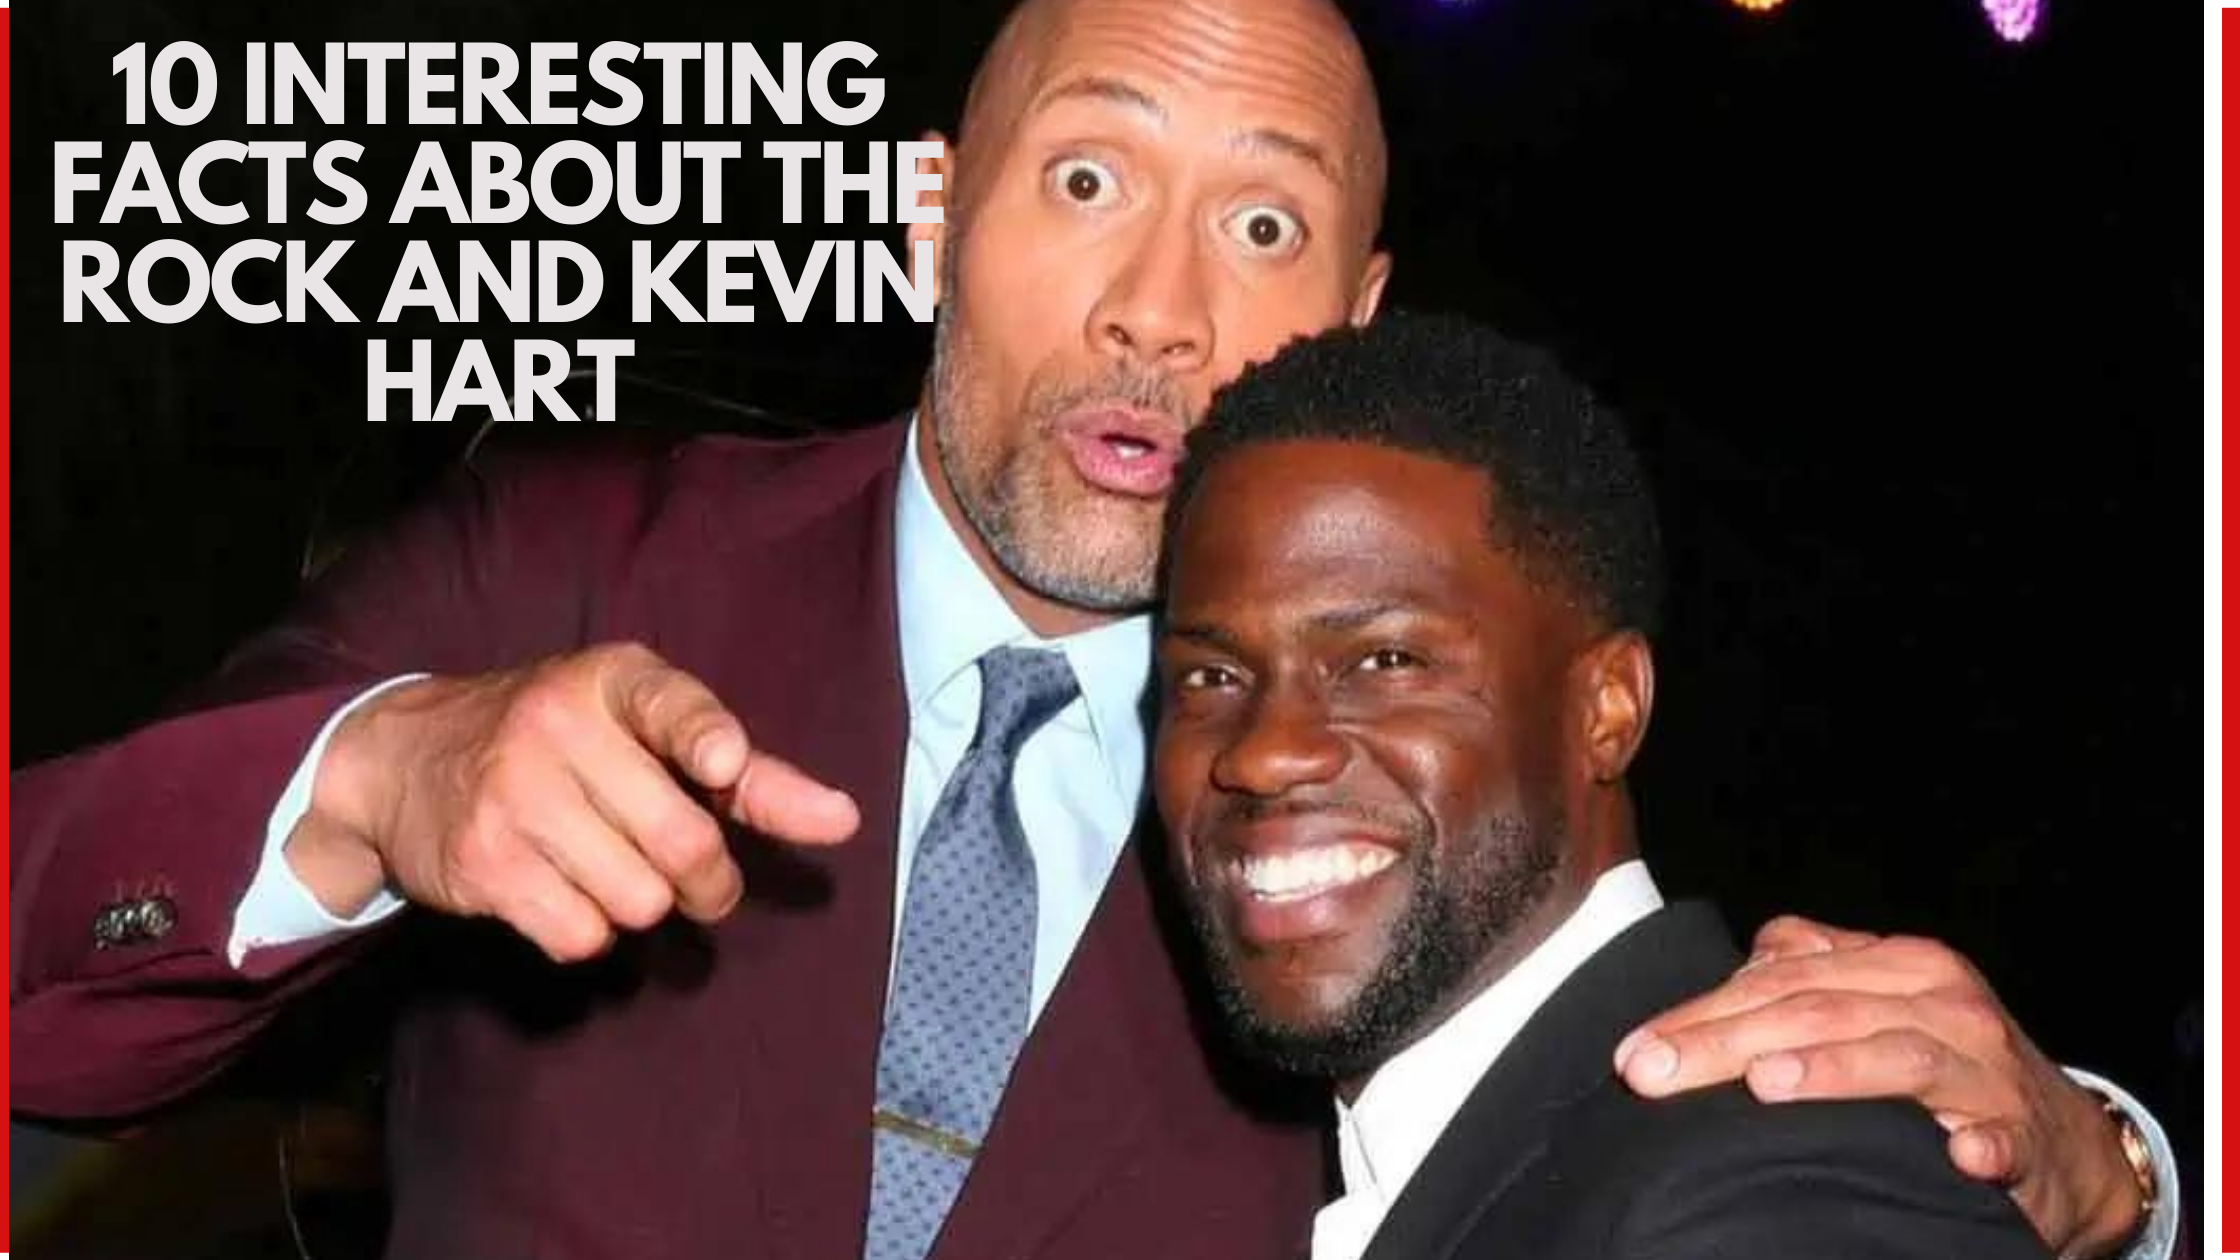 10 Interesting Facts About The Rock and Kevin Hart